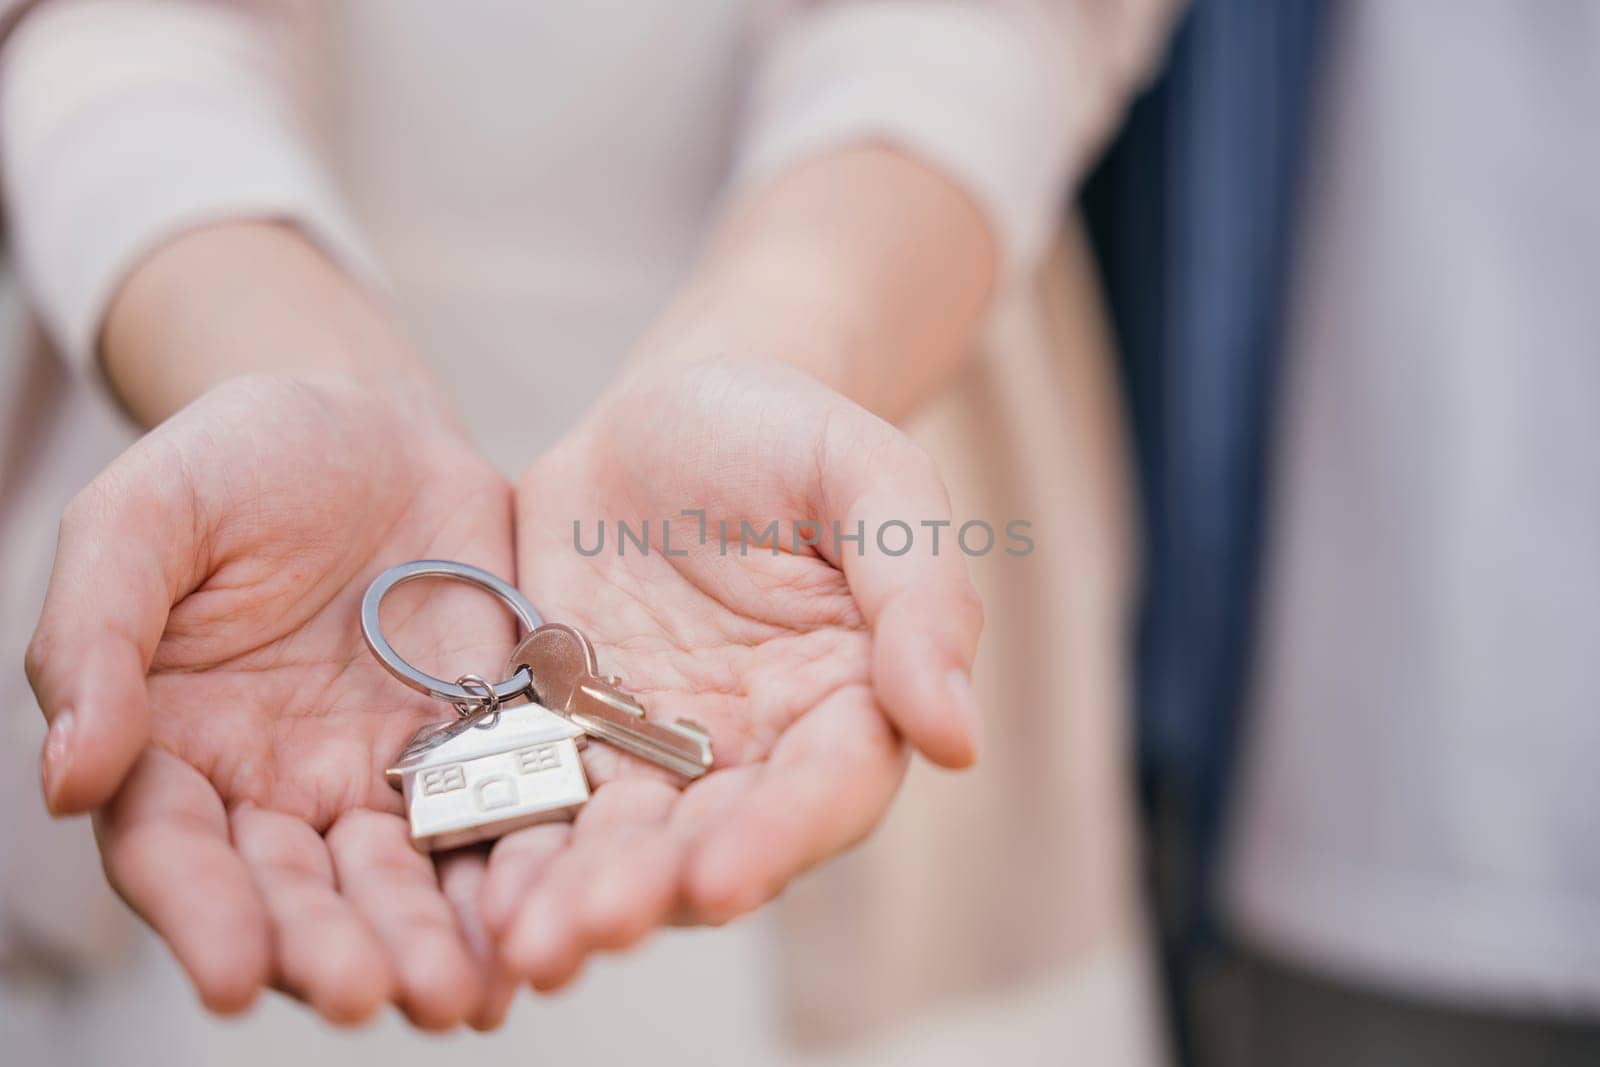 Landlord's hand presents keys for a new house. Symbolizes investment tenant security and real estate ownership. Close-up view denotes successful property deal. Give me the keys